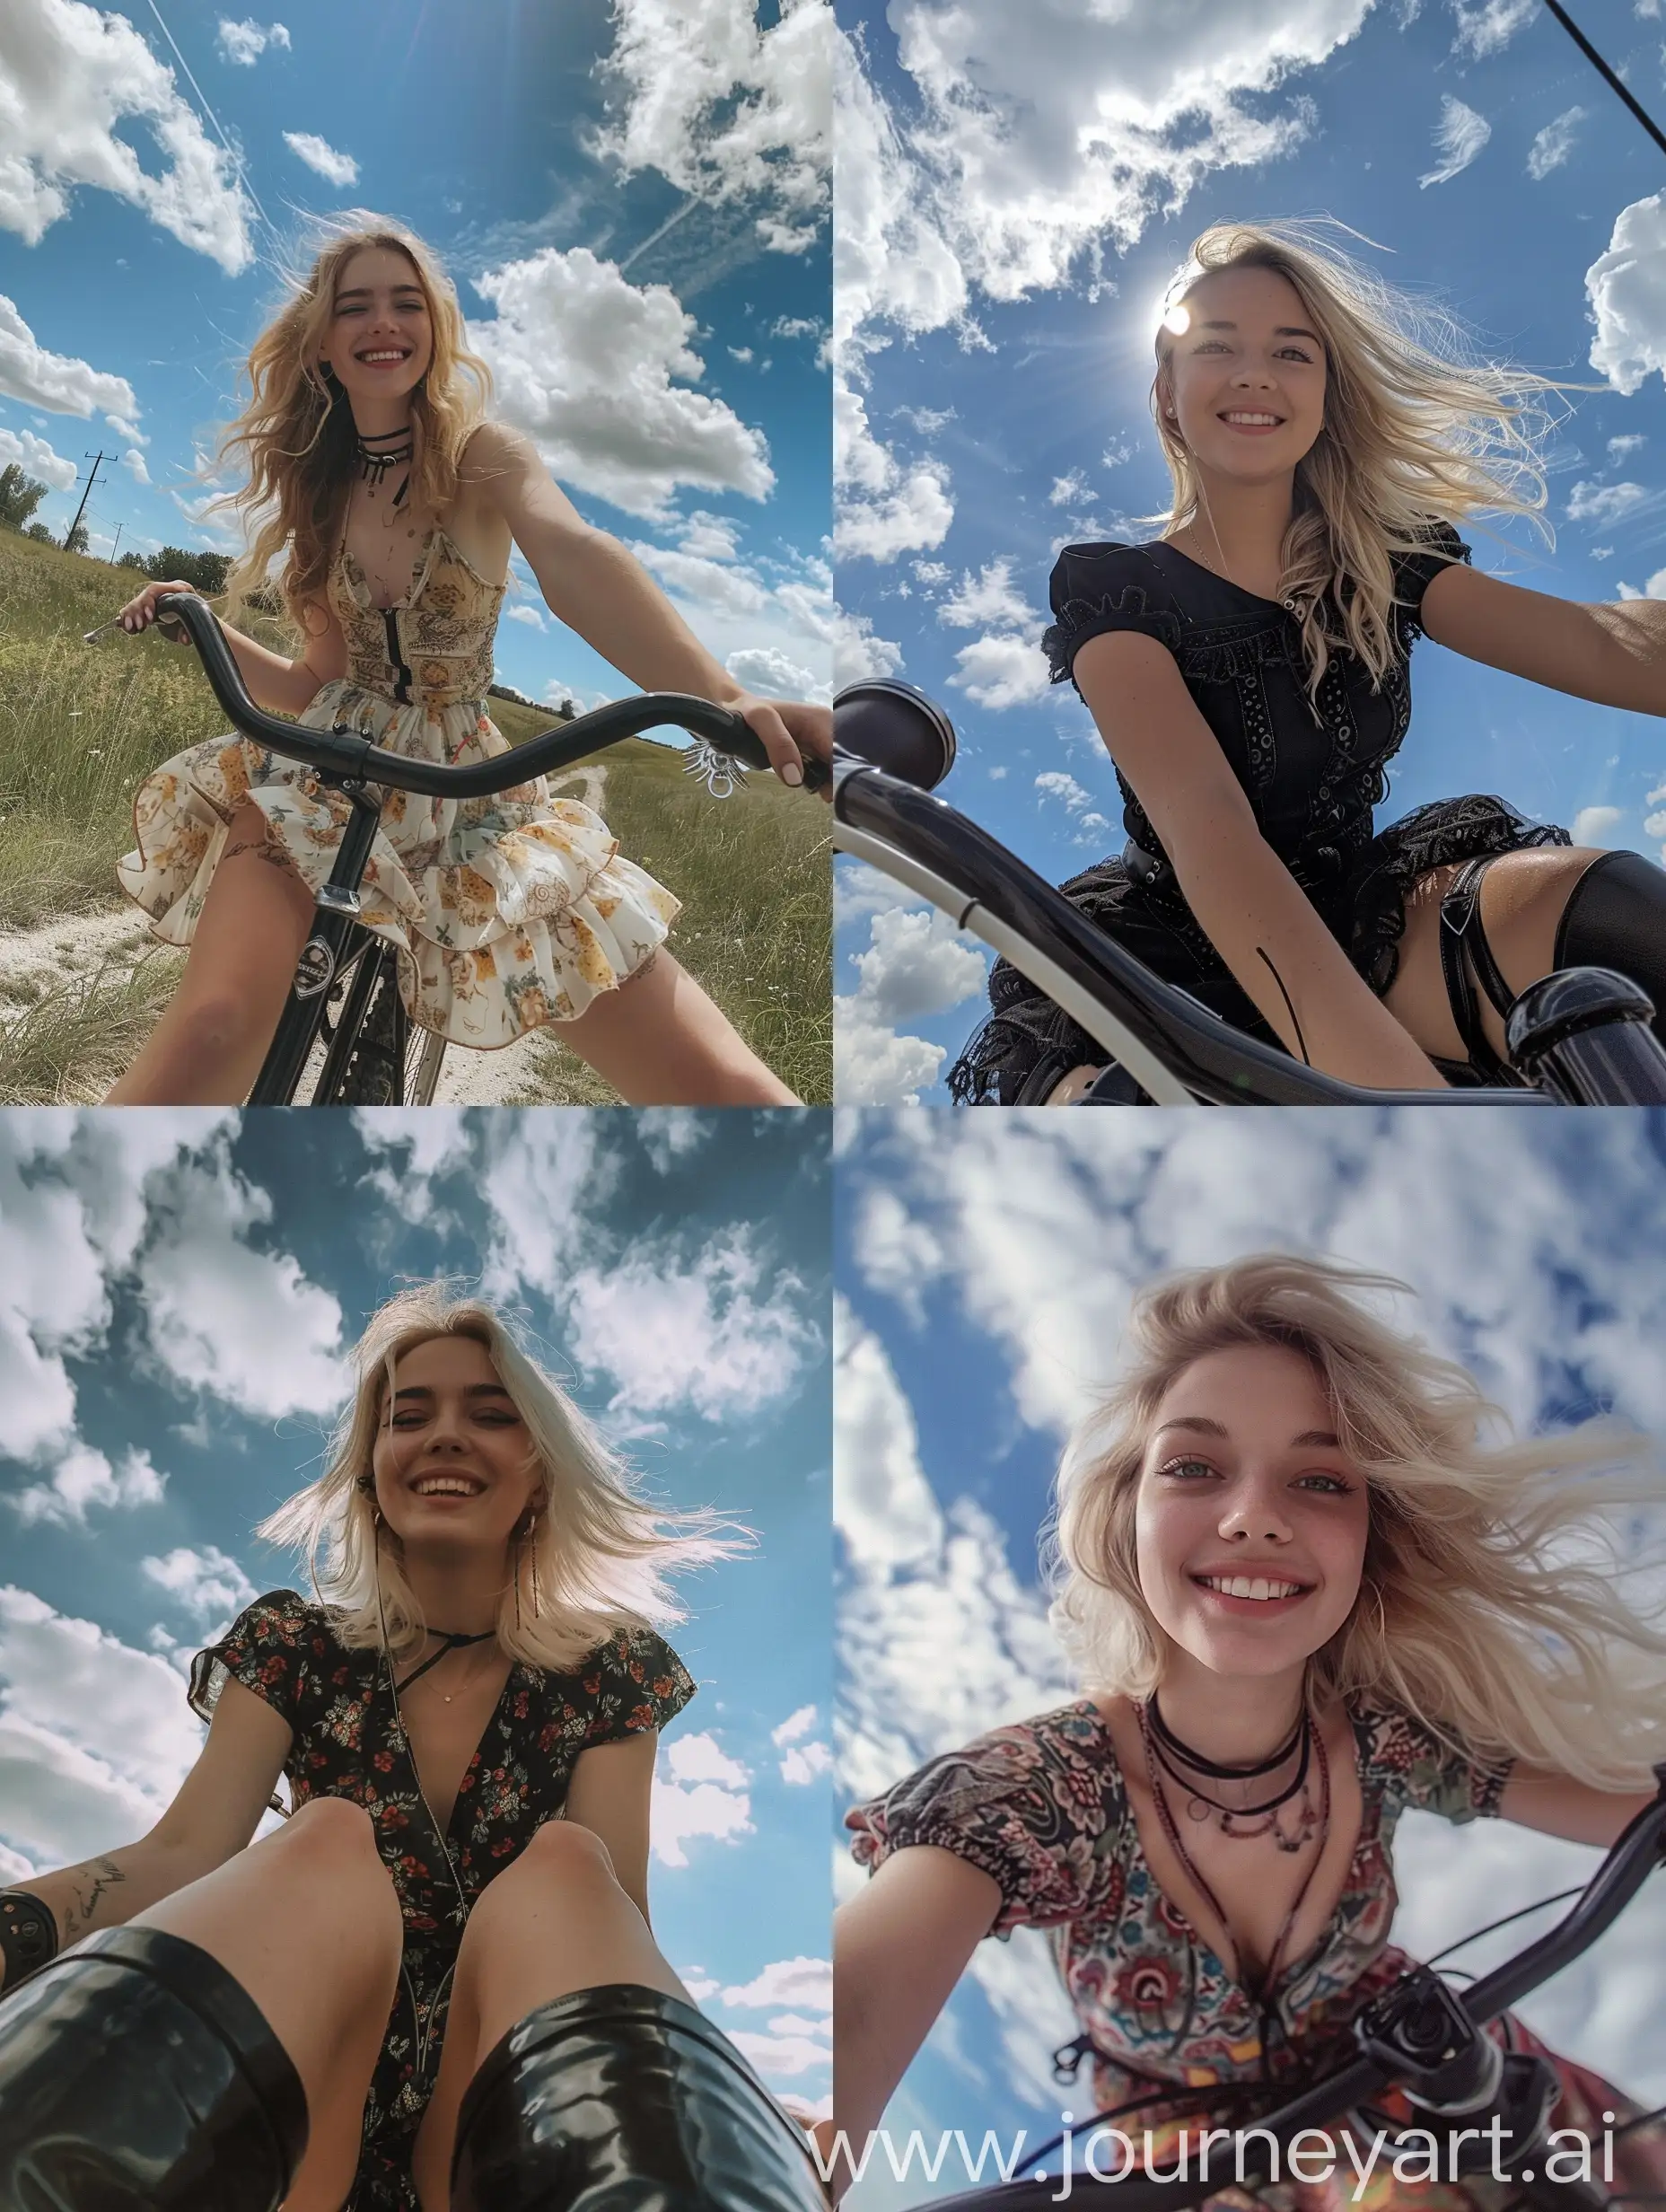 a girl, 22 years old, blonde hair, strange dress, black boots, smiling, , sitting on a bicycle, no effects, selfie , iphone selfie, no filters, natural , iphone photo natural, camera down angle, sky view, down view